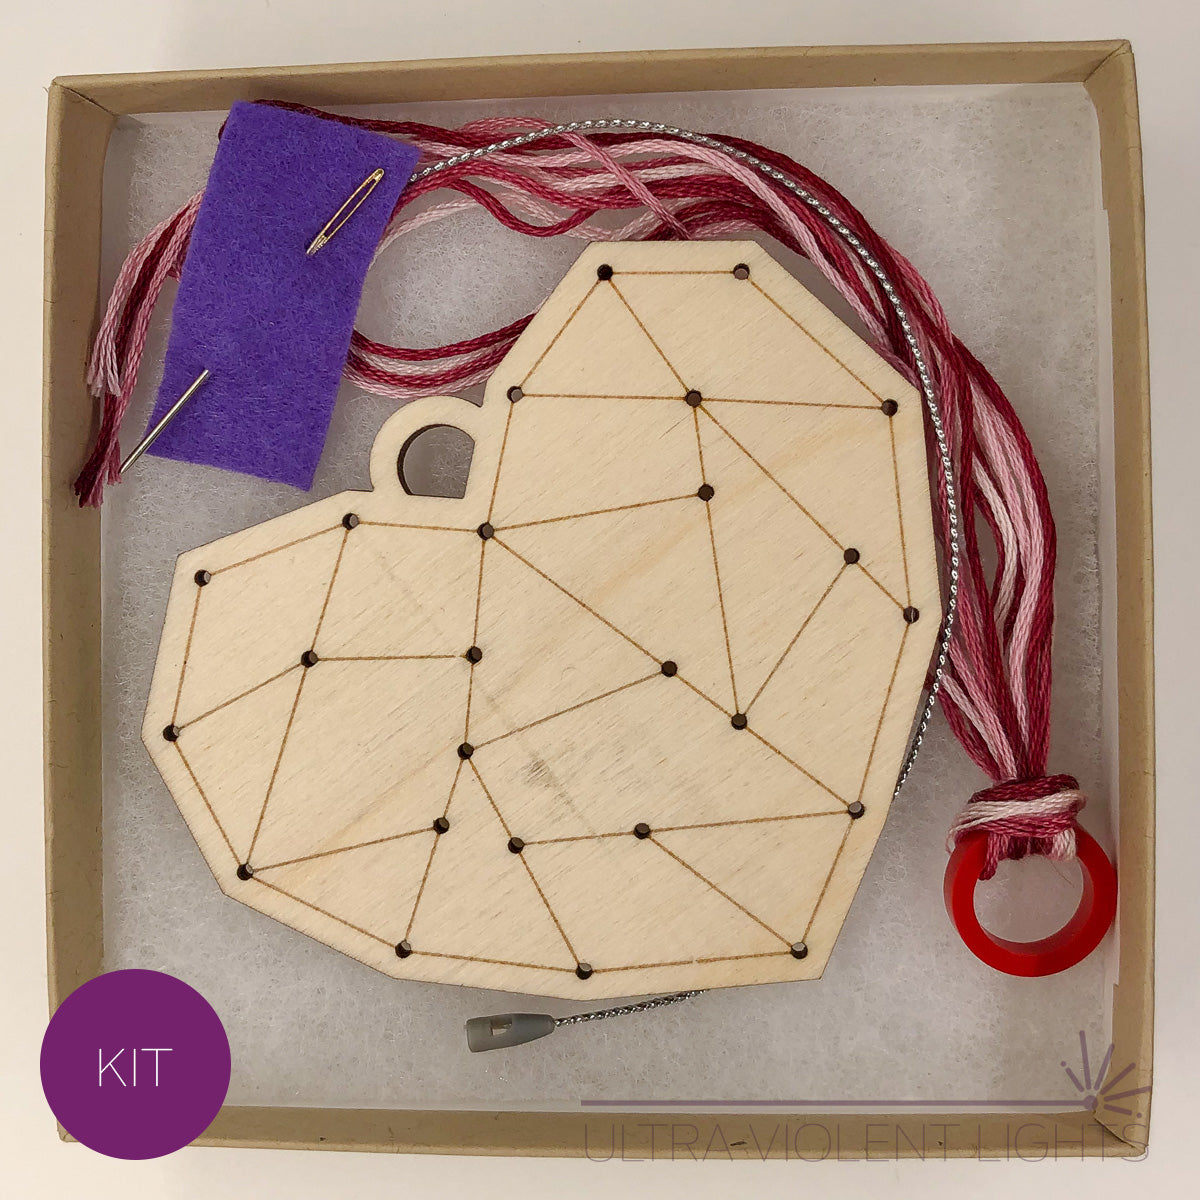 A heart wooden embroidery kit with floss and a needle in a box